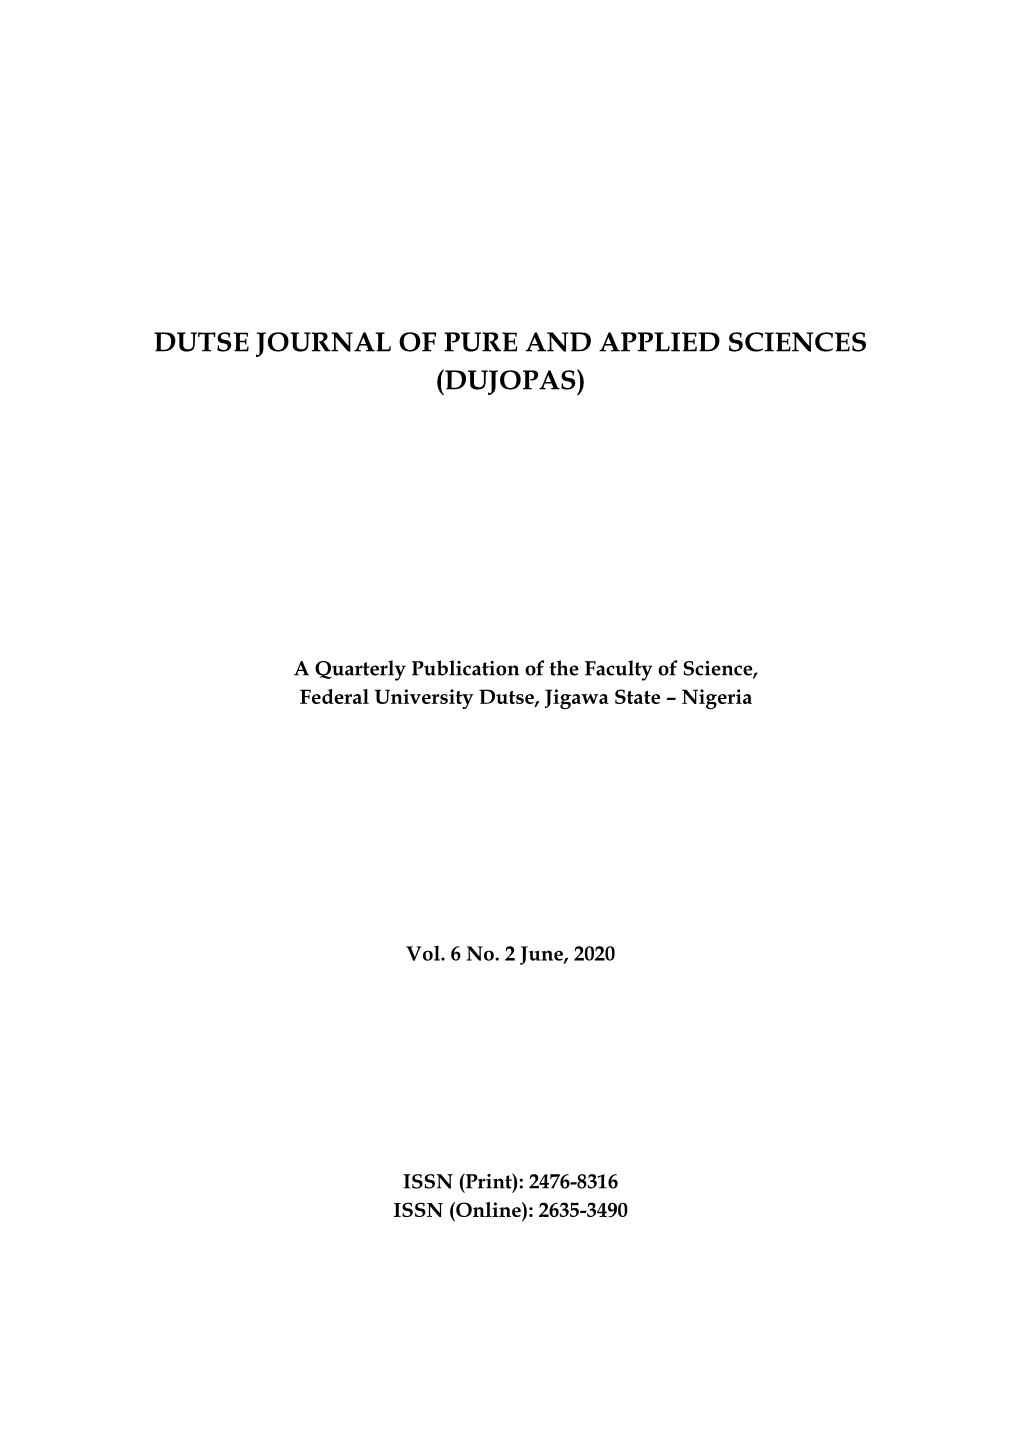 Dutse Journal of Pure and Applied Sciences (Dujopas)